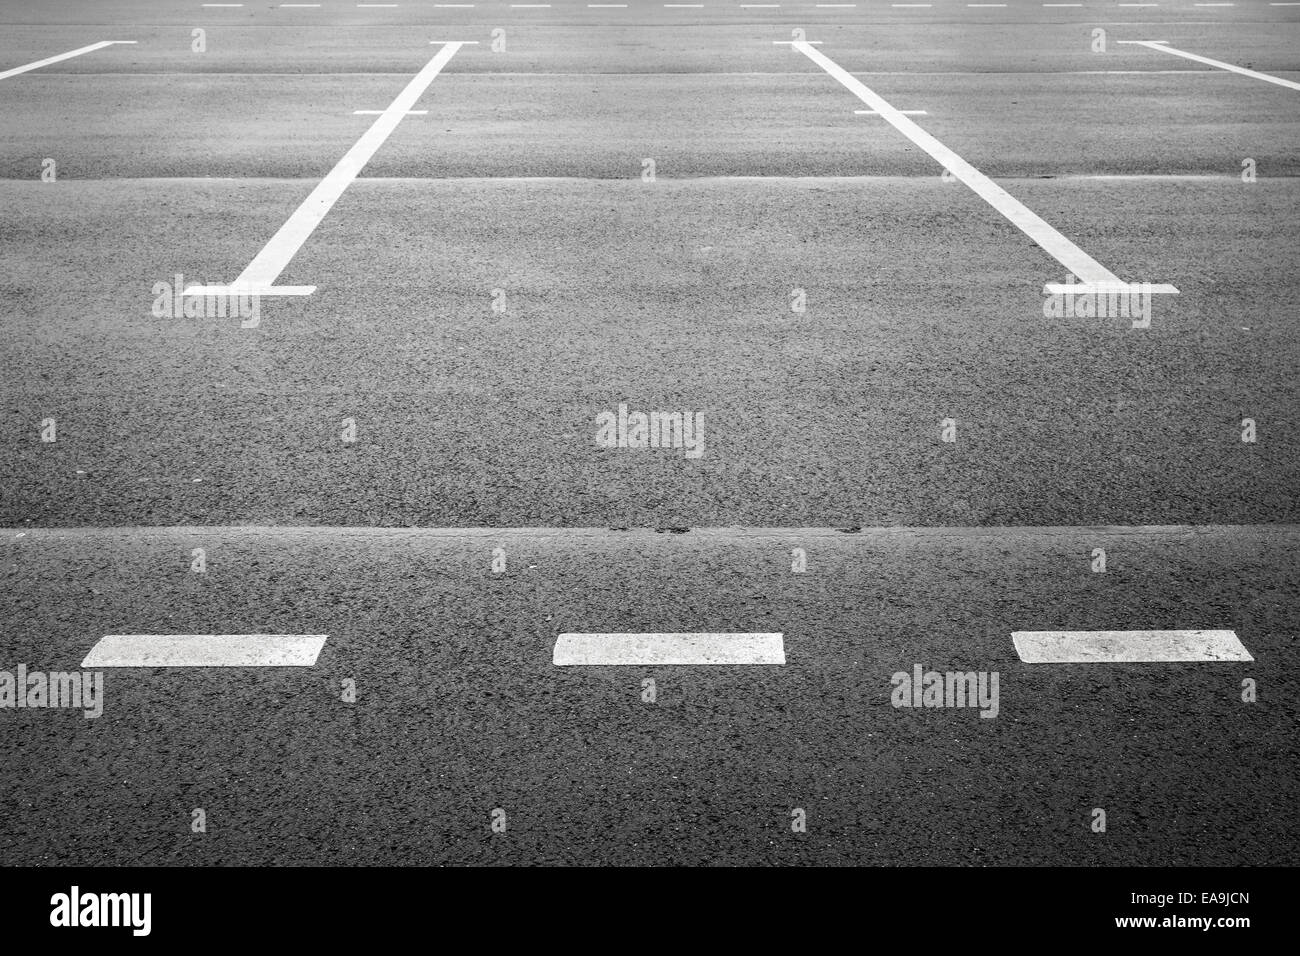 Vacant parking place, an empty space on asphalt pavement with white road marking Stock Photo